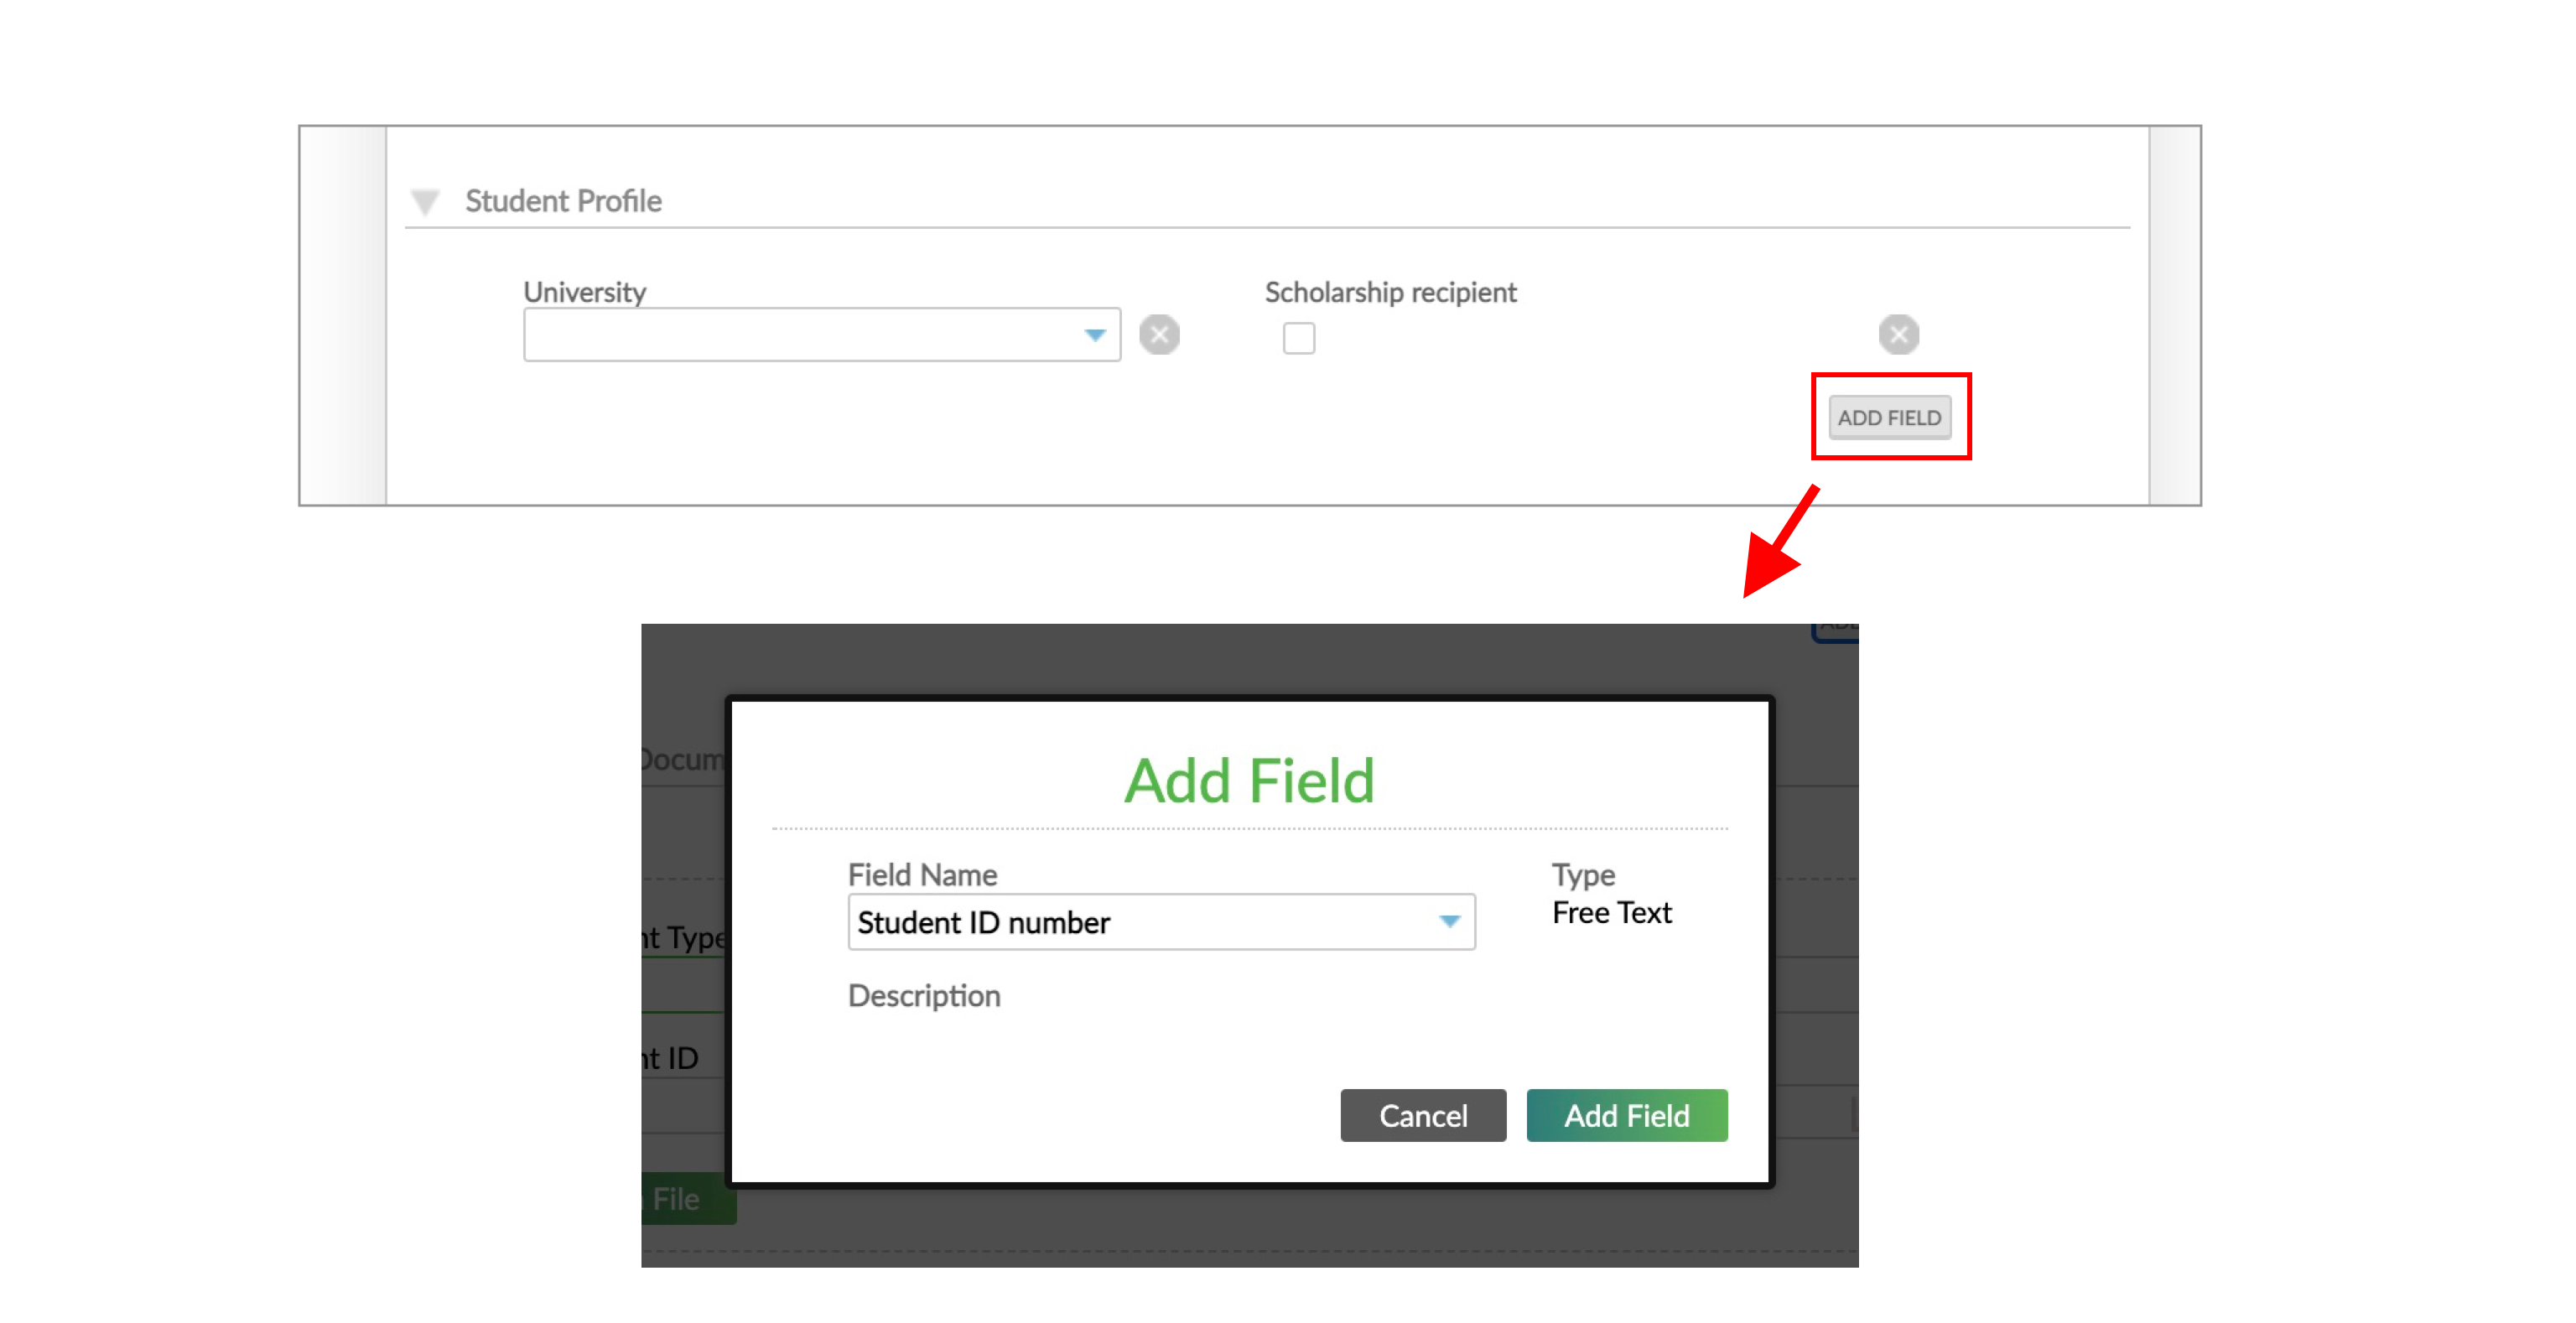 The Student ID Number custom field is available in the form to be added